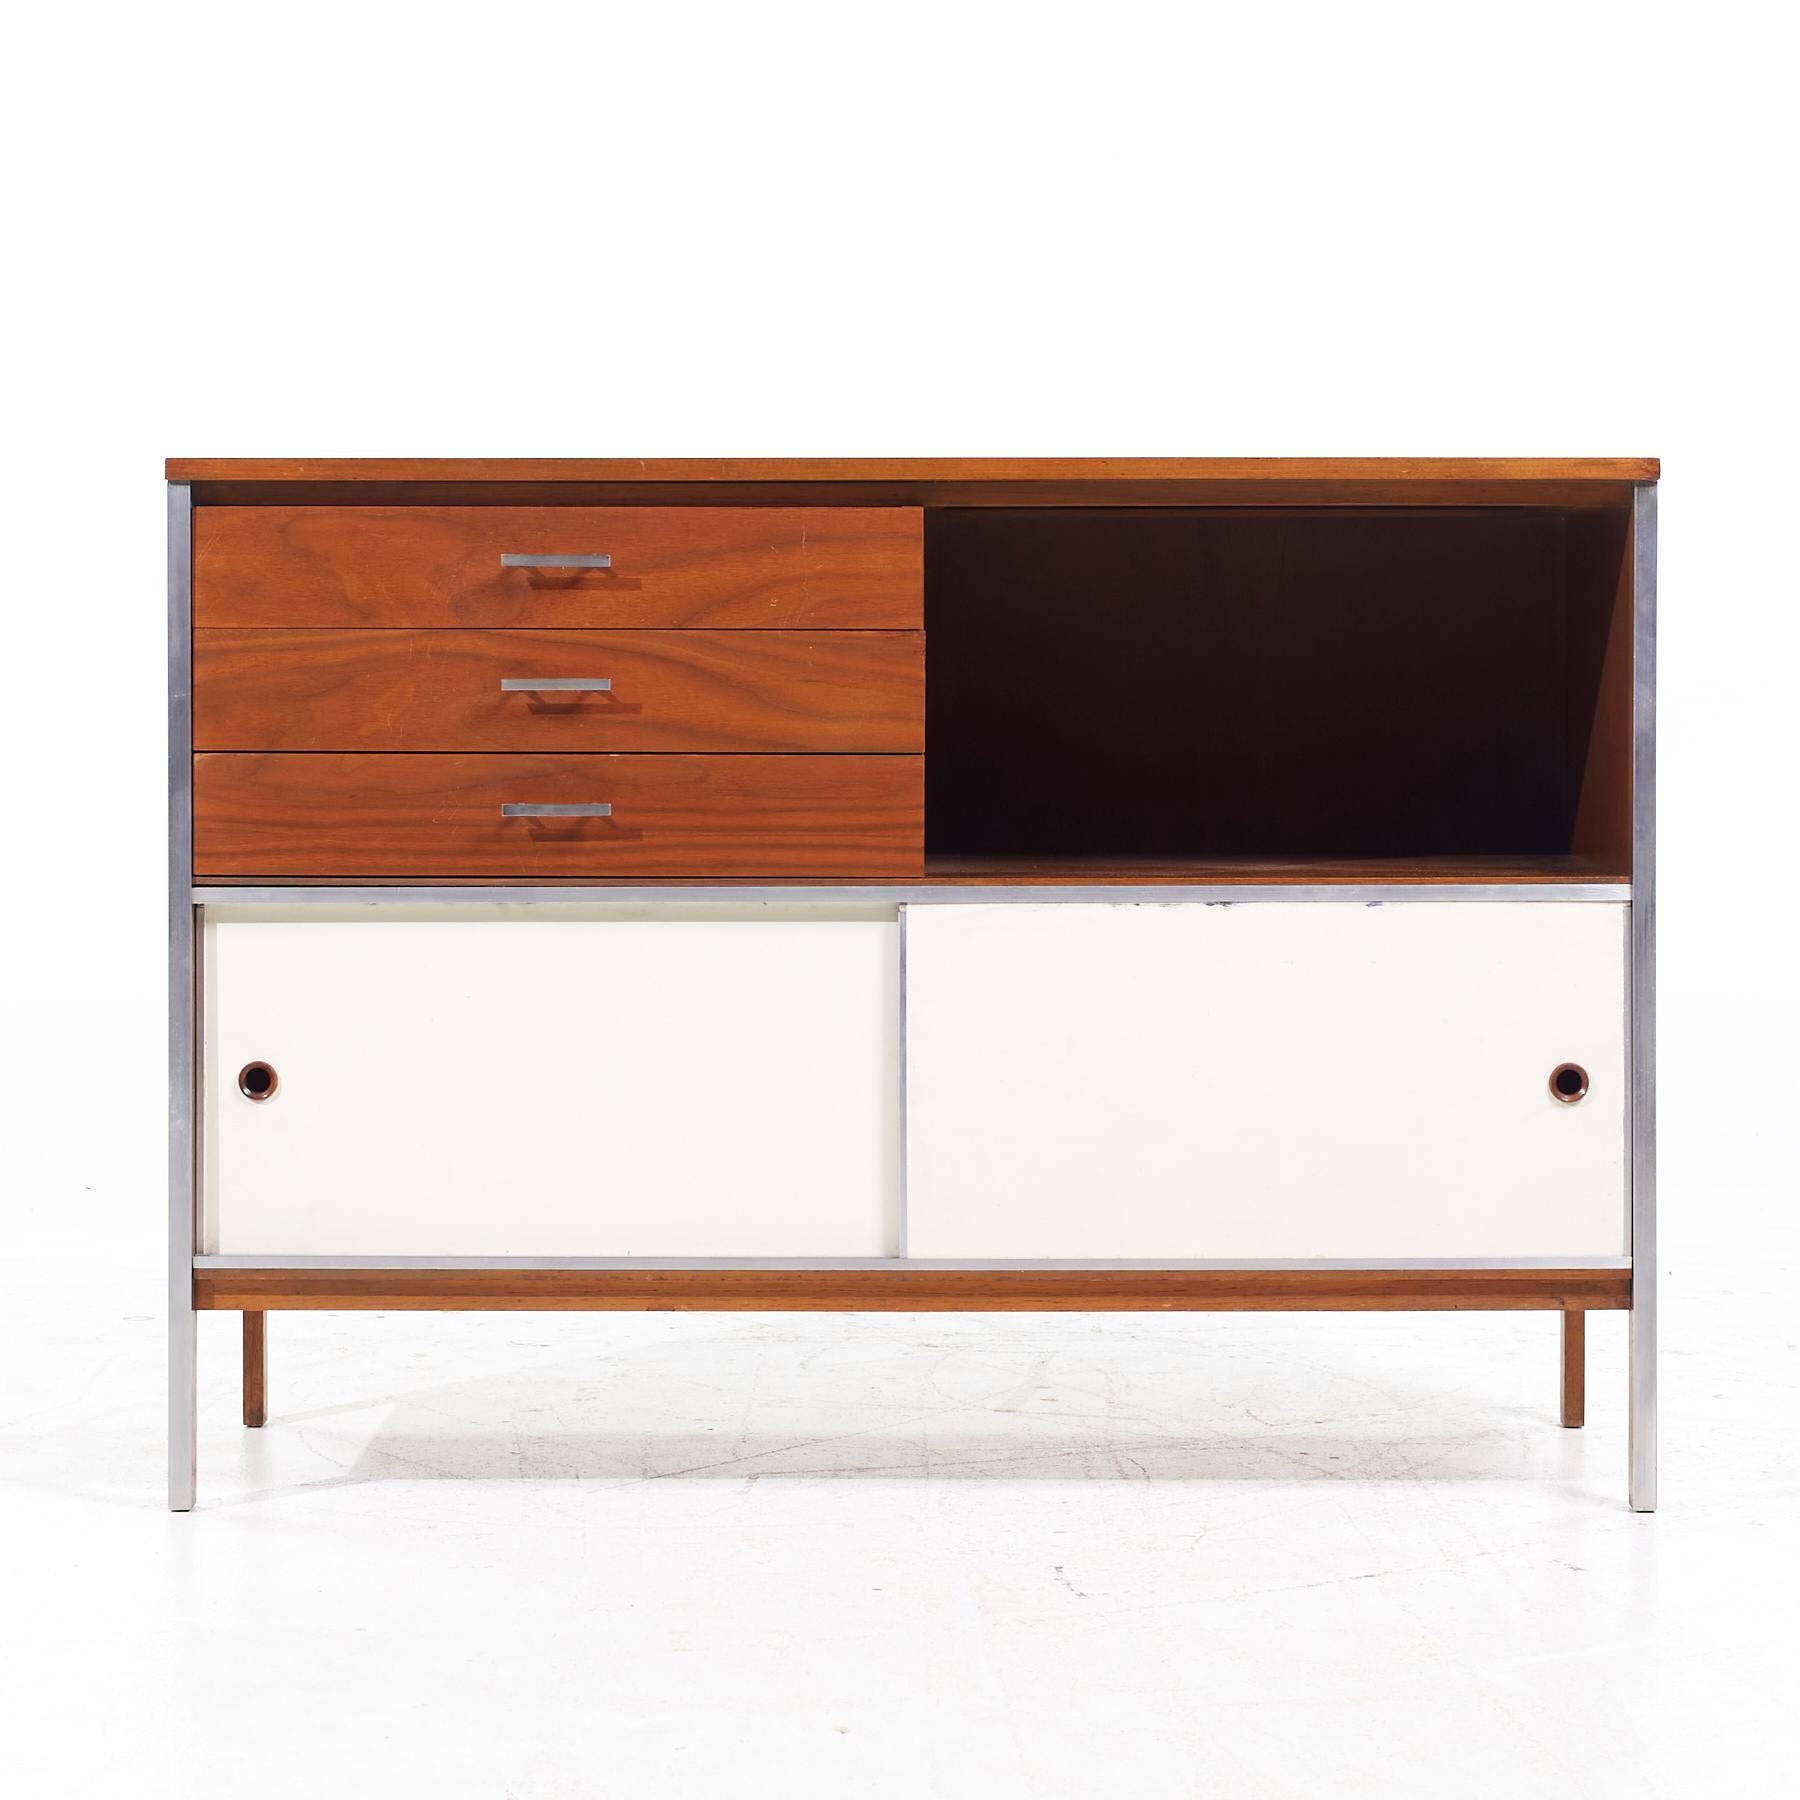 Paul McCobb for Calvin Mid Century Walnut and Stainless Steel Sliding Door Credenza

This credenza measures: 48 wide x 18 deep x 34 inches high

All pieces of furniture can be had in what we call restored vintage condition. That means the piece is